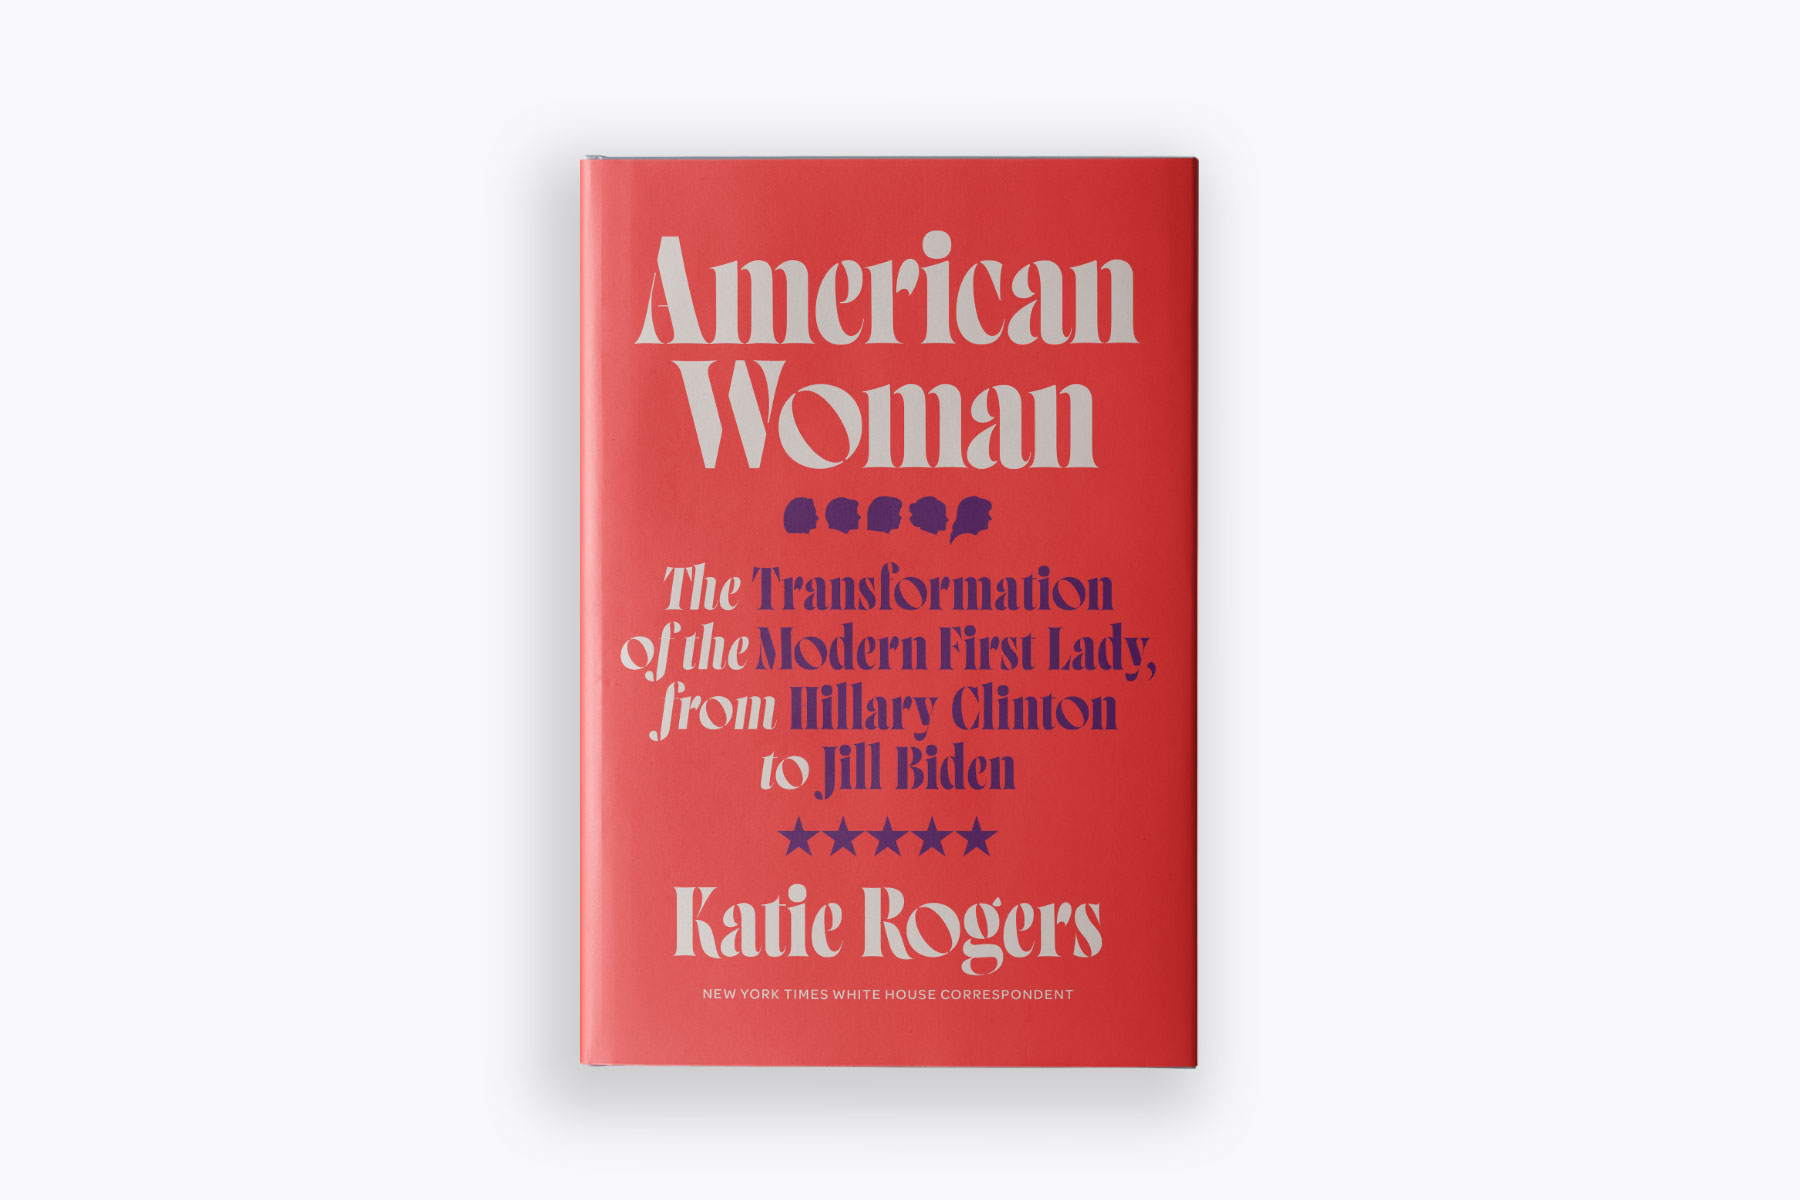 Cover of Katie Rogers' book, American Woman.